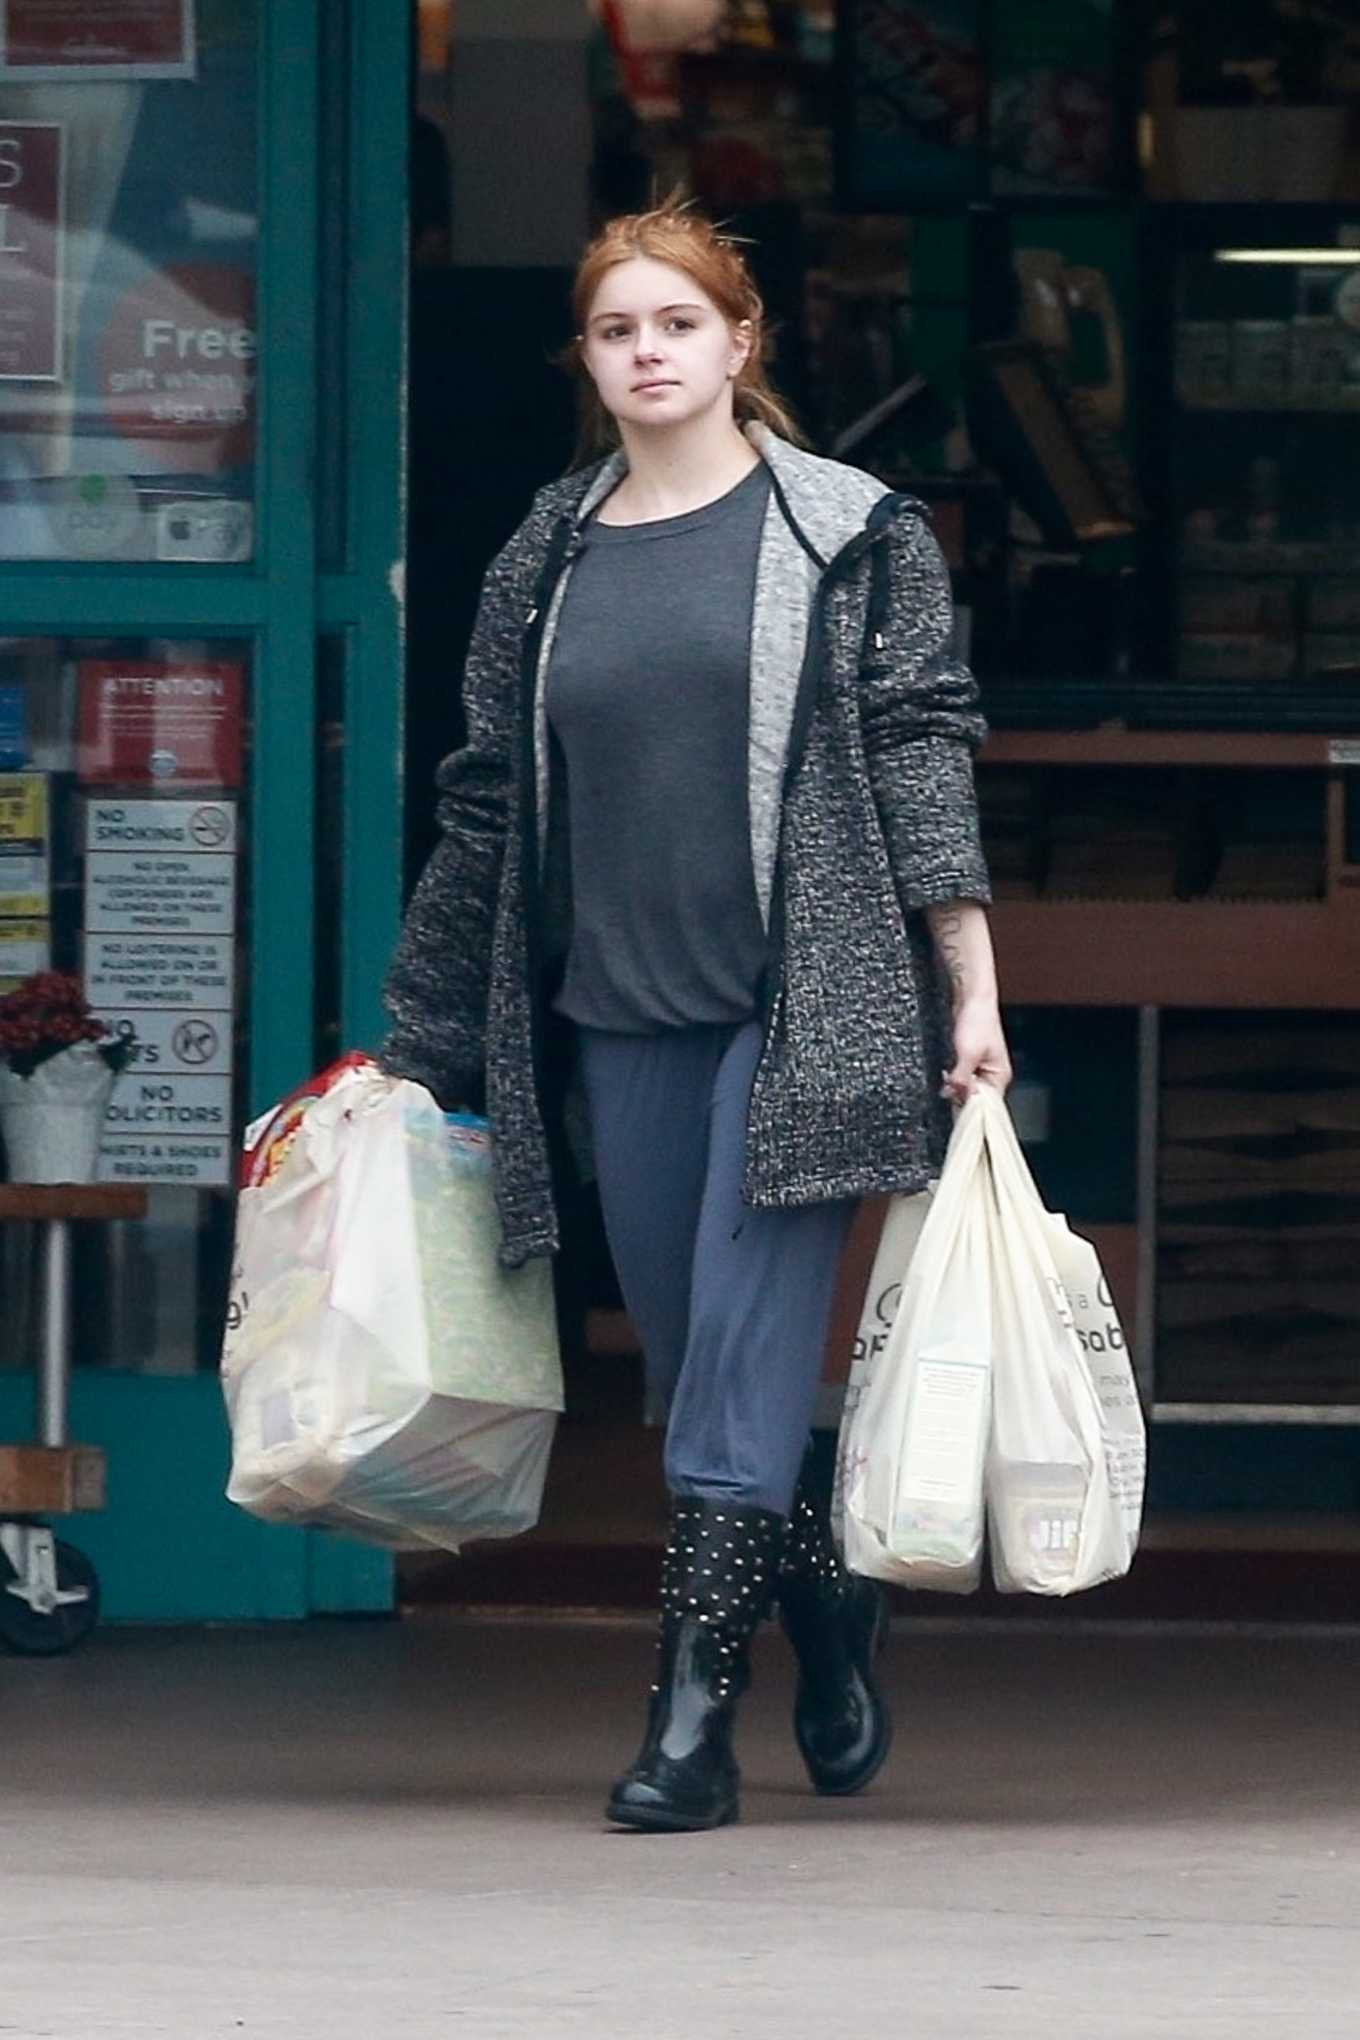 Ariel Winter â€“ Grocery shopping done at Gelsonâ€™s in Los Angeles